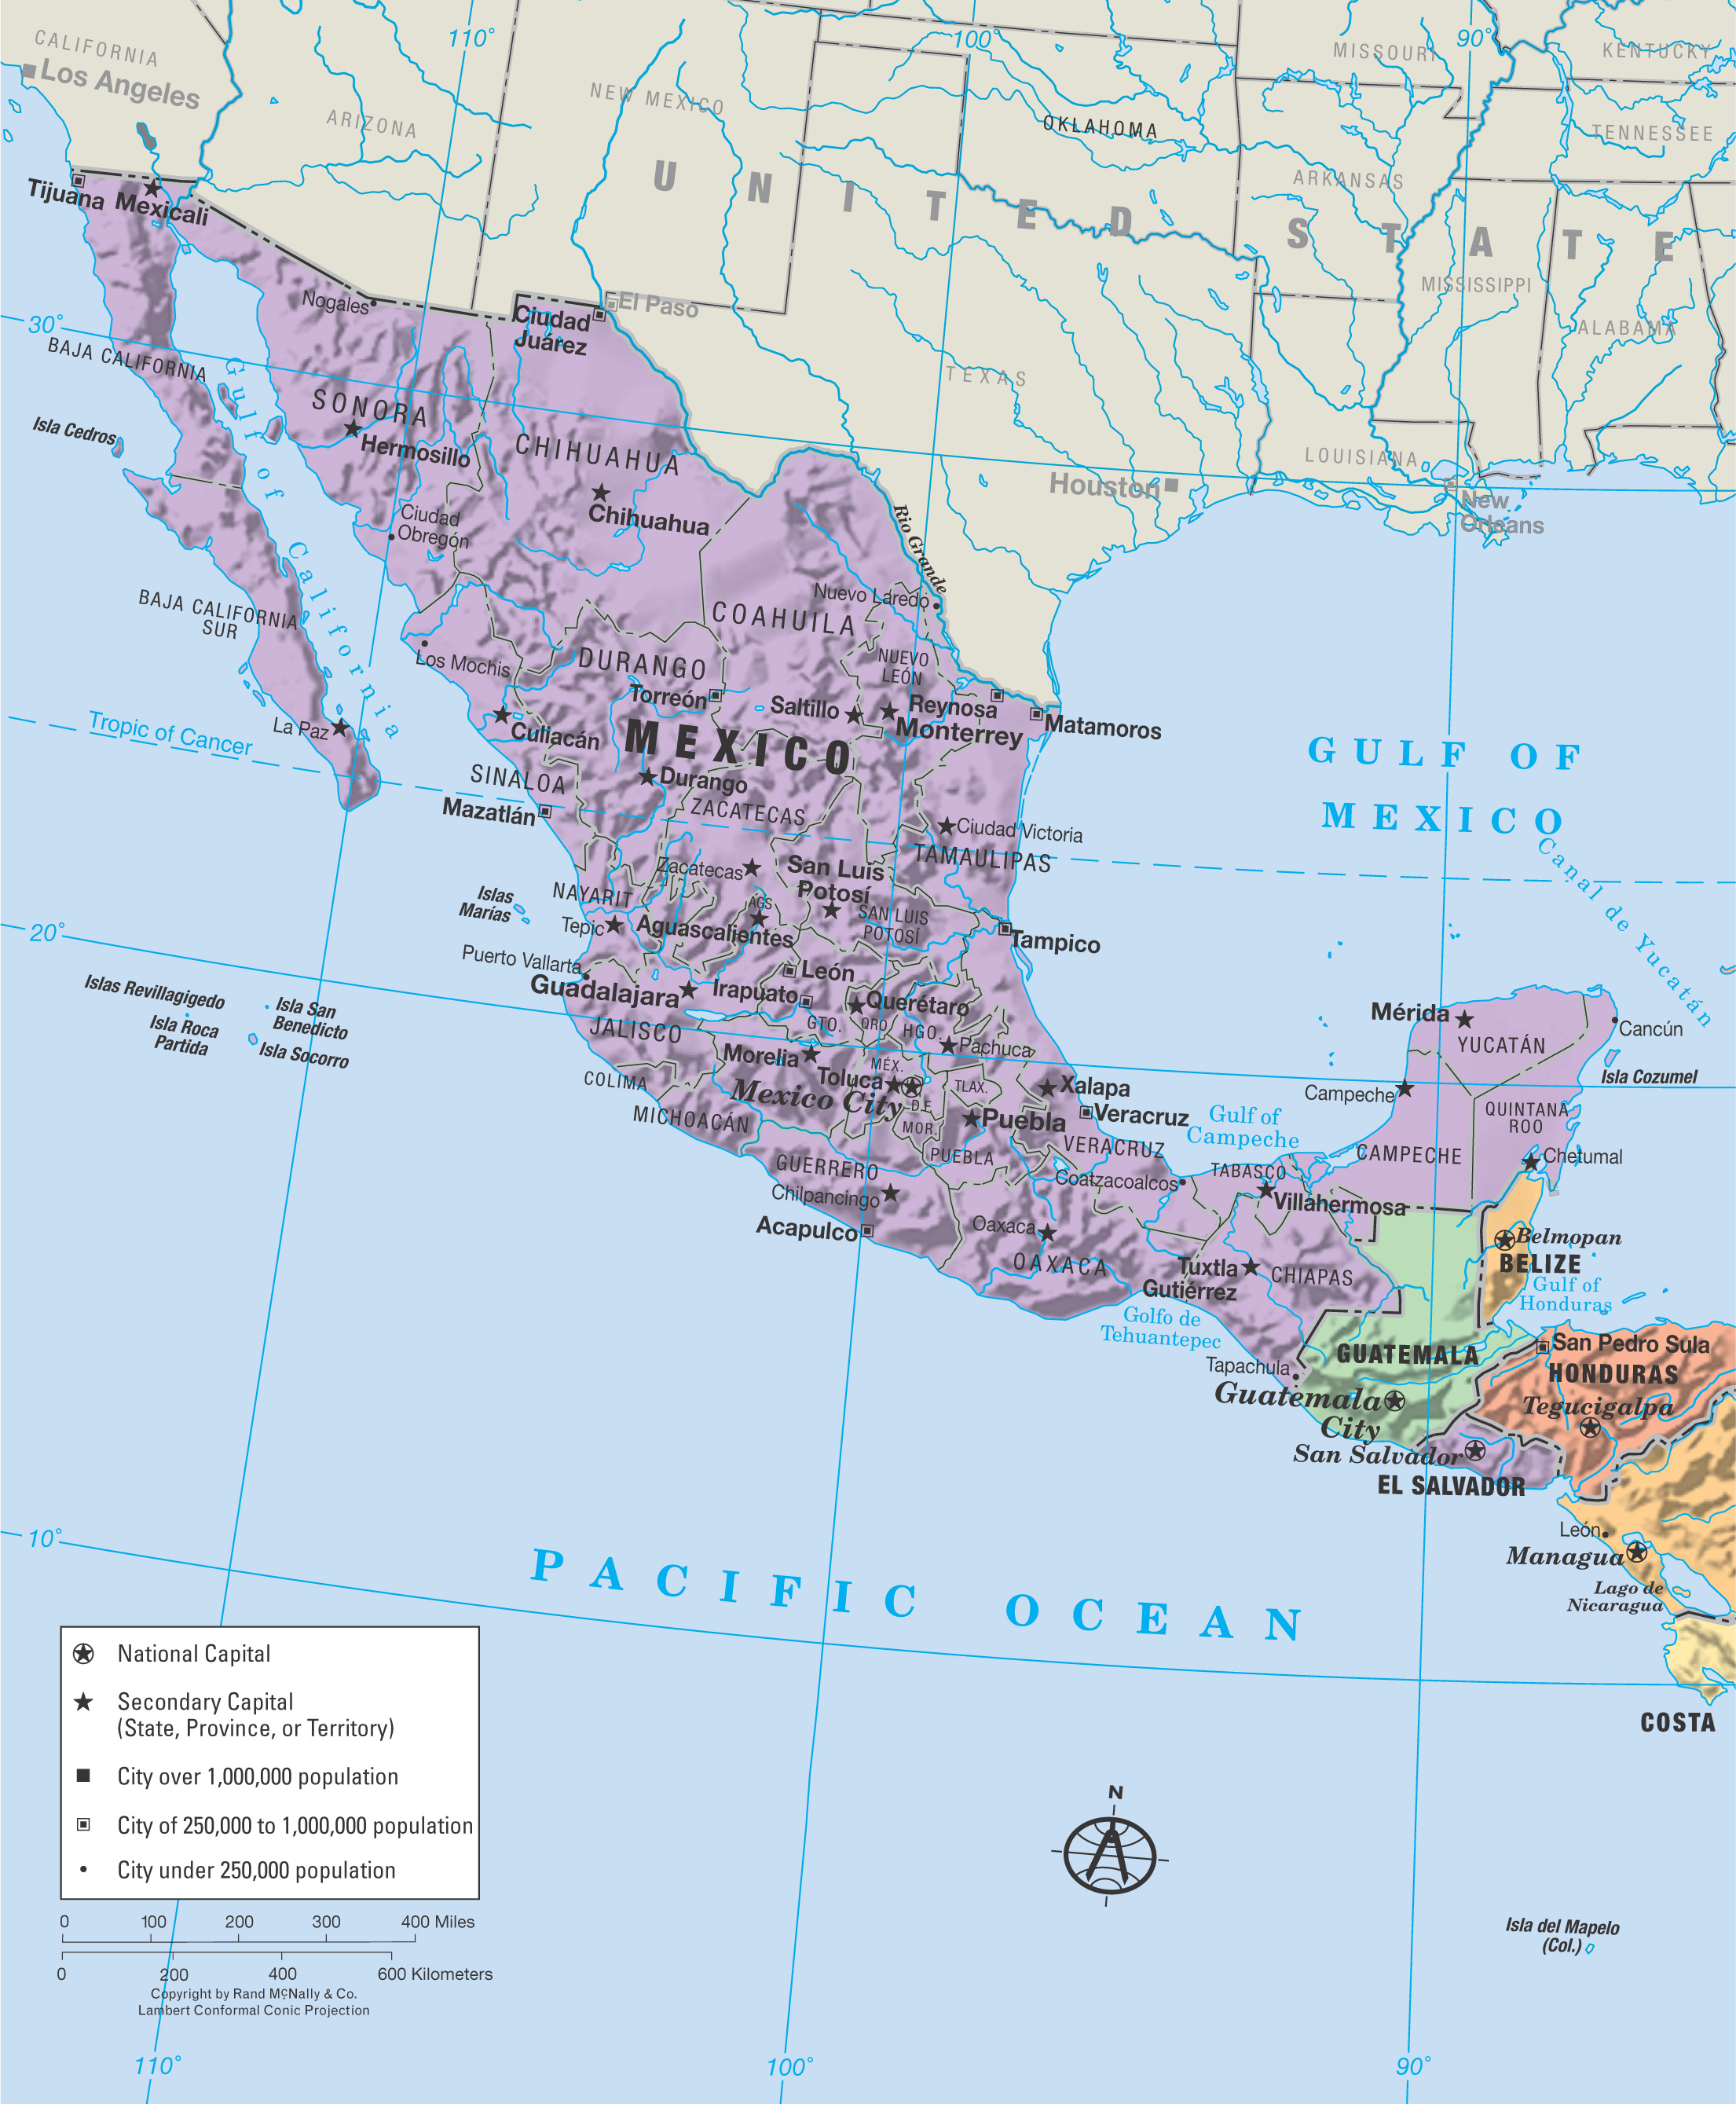 Political map of Mexico, Central America, and the Caribbean: shows national capitals and major cities